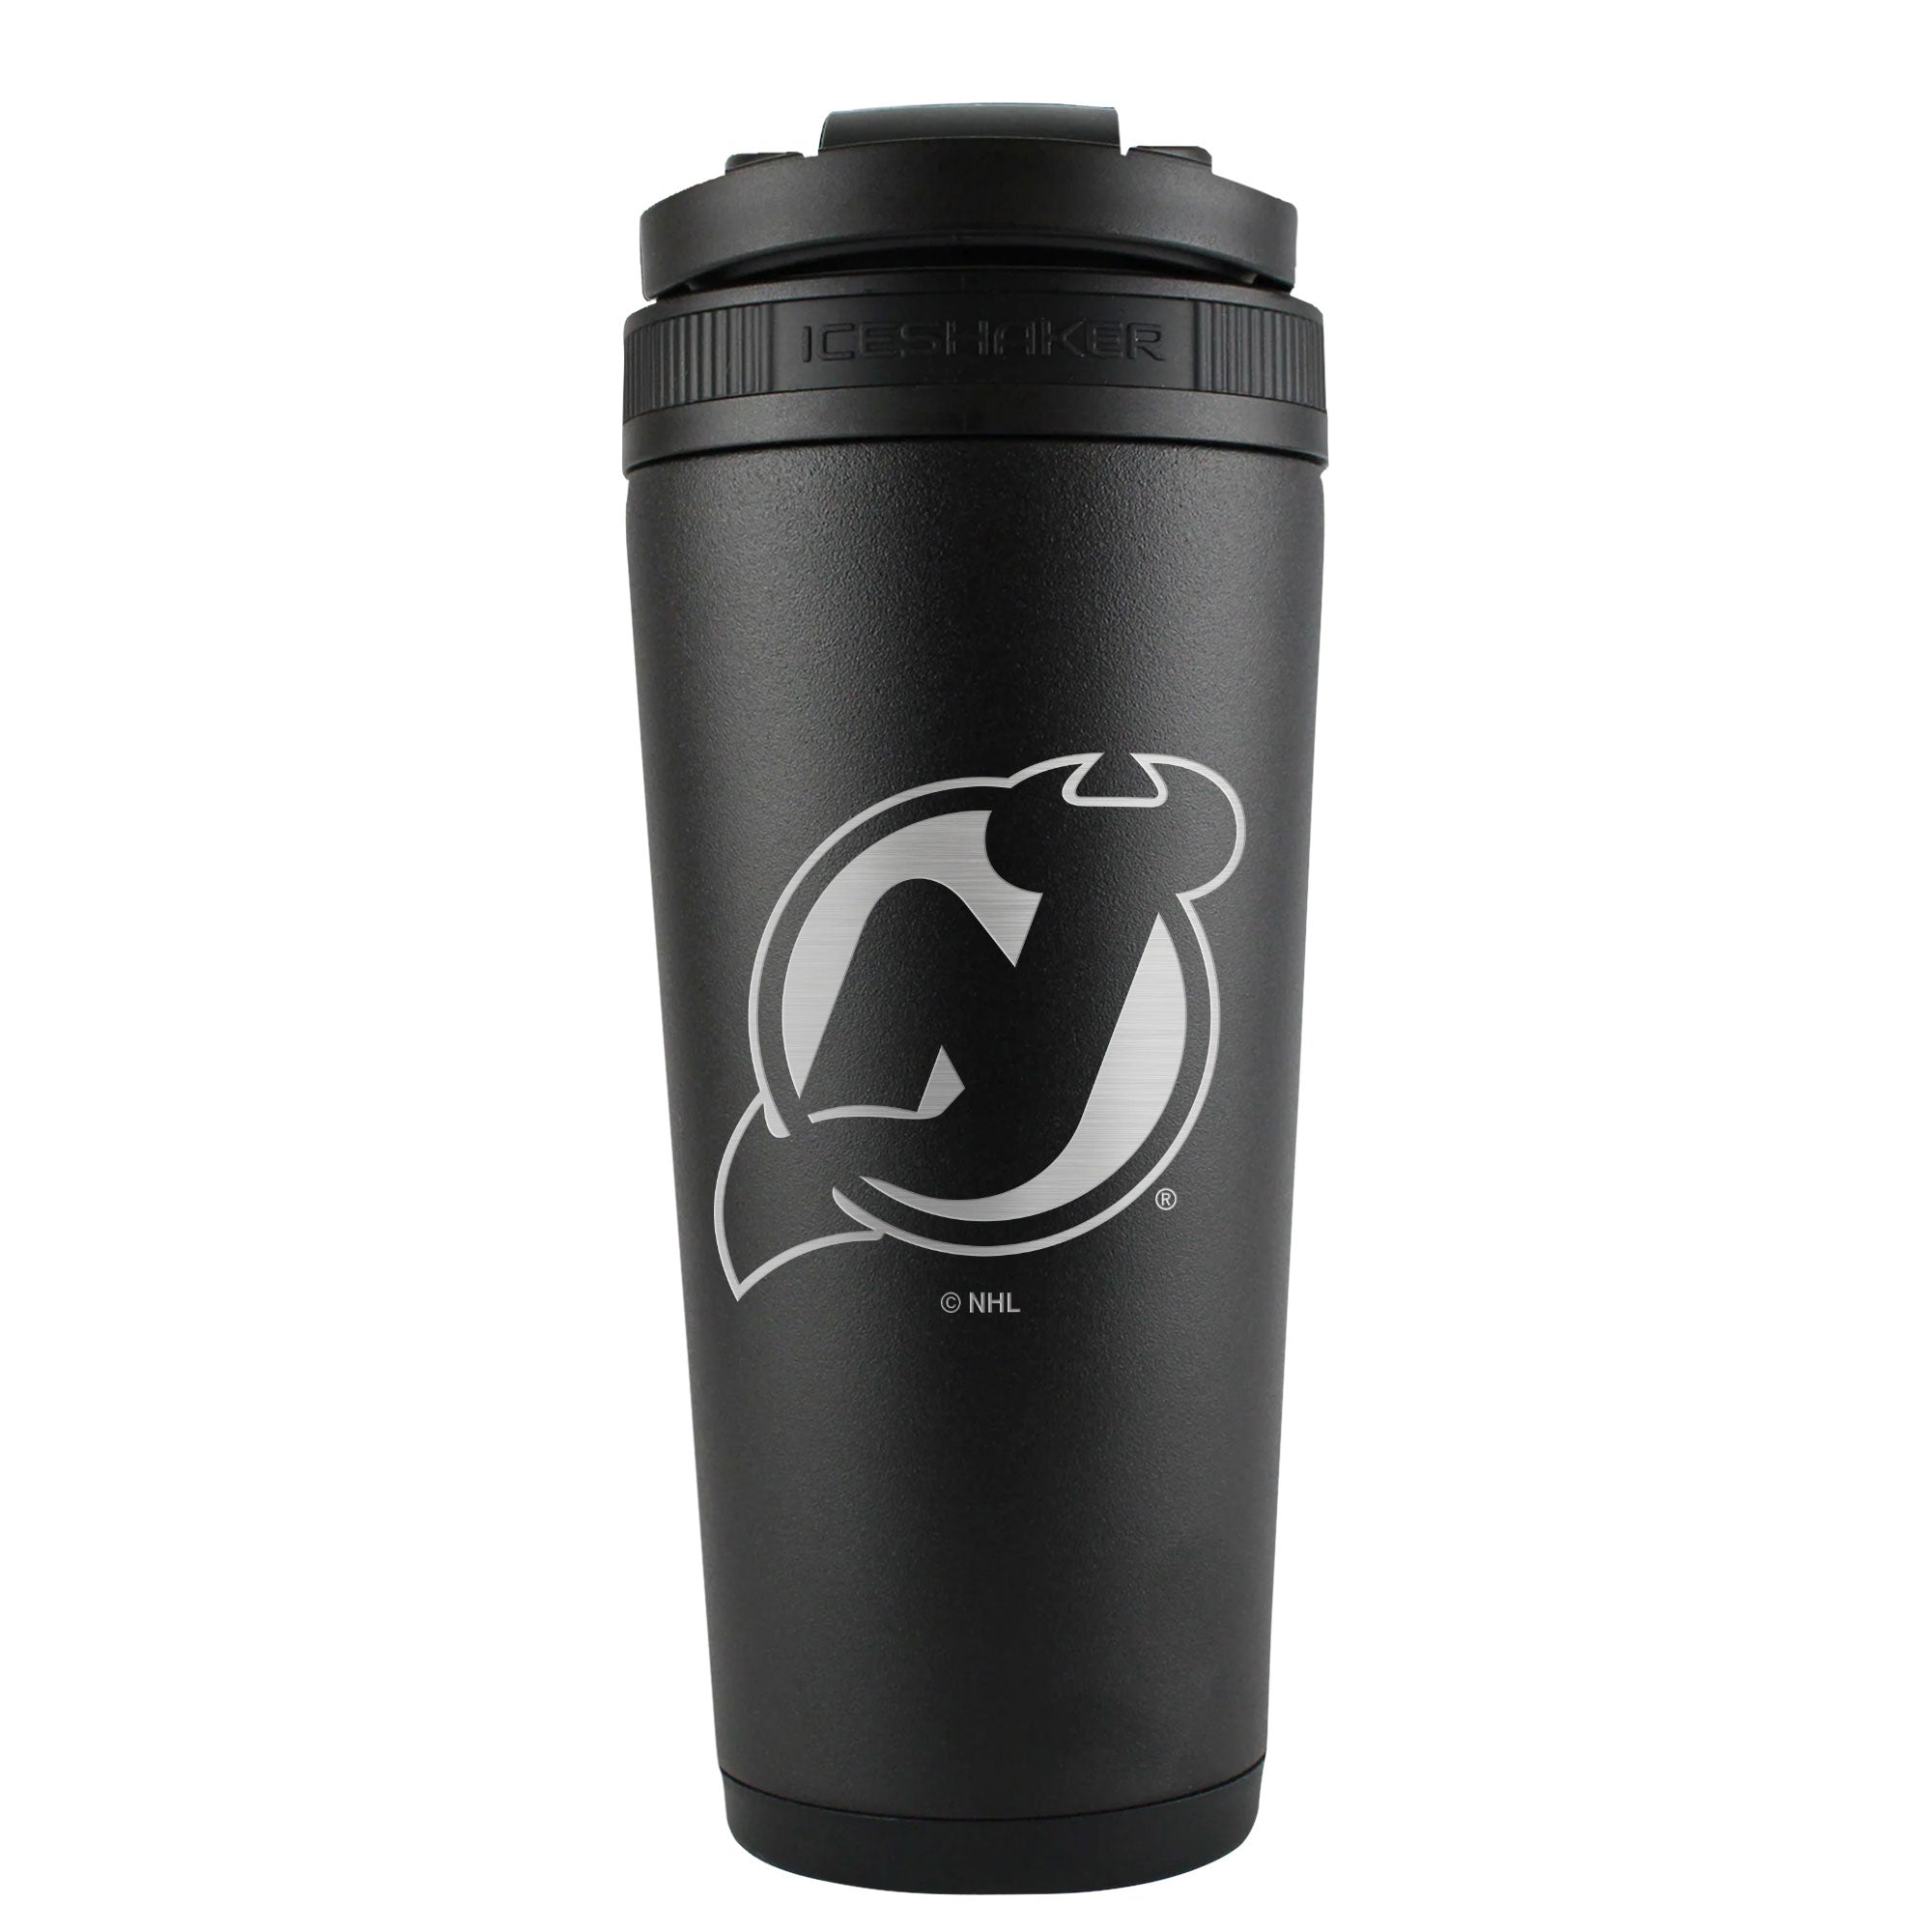 Officially Licensed New Jersey Devils 26oz Ice Shaker